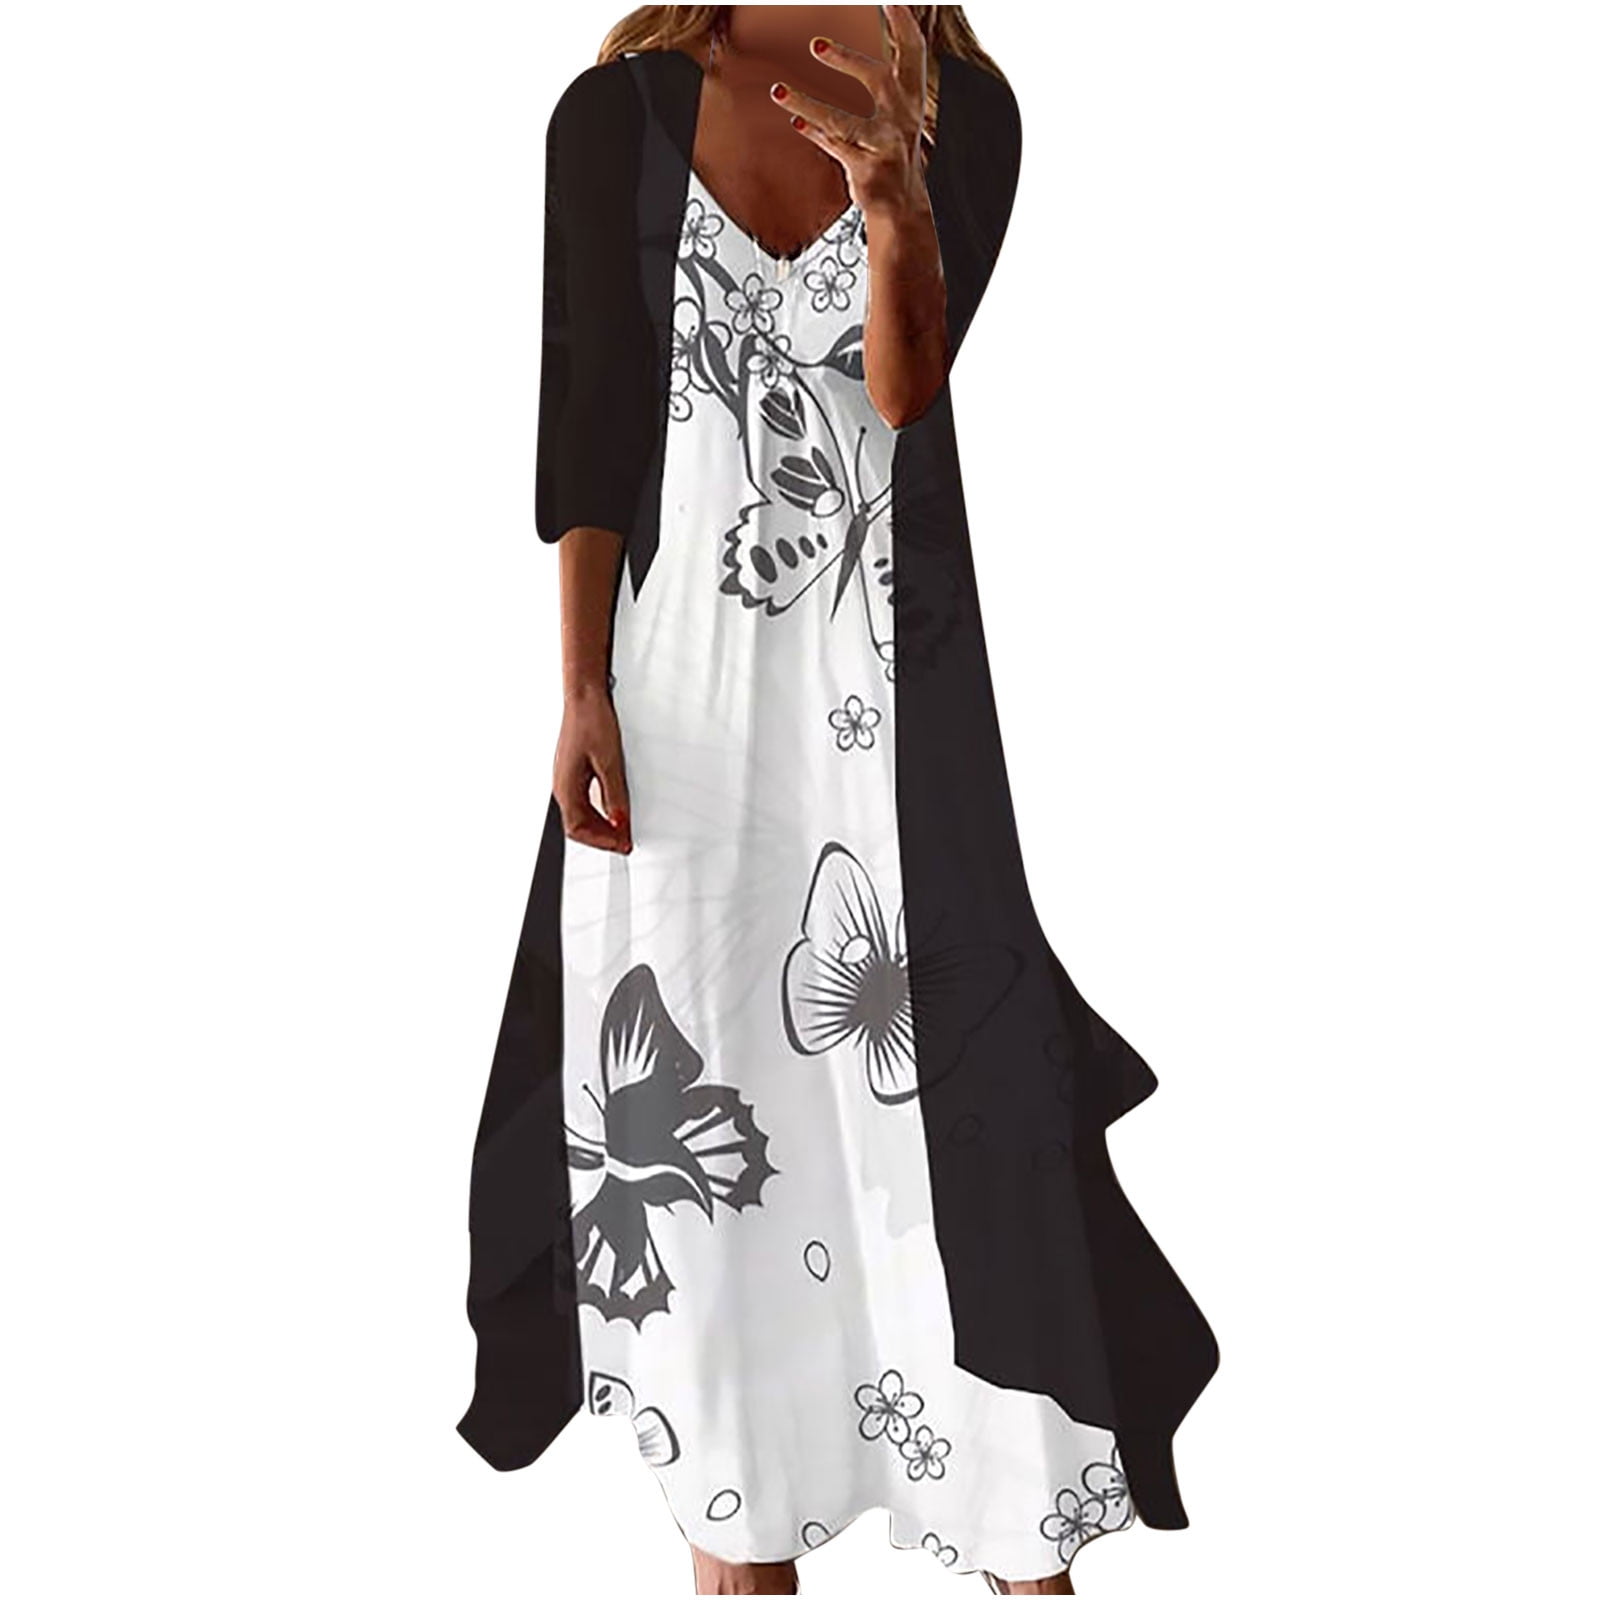 Shakumy Women Long Sleeve Loose Floral Print Maxi Dress Boho Casual Round Neck Patchwork Long Dress with Pockets 